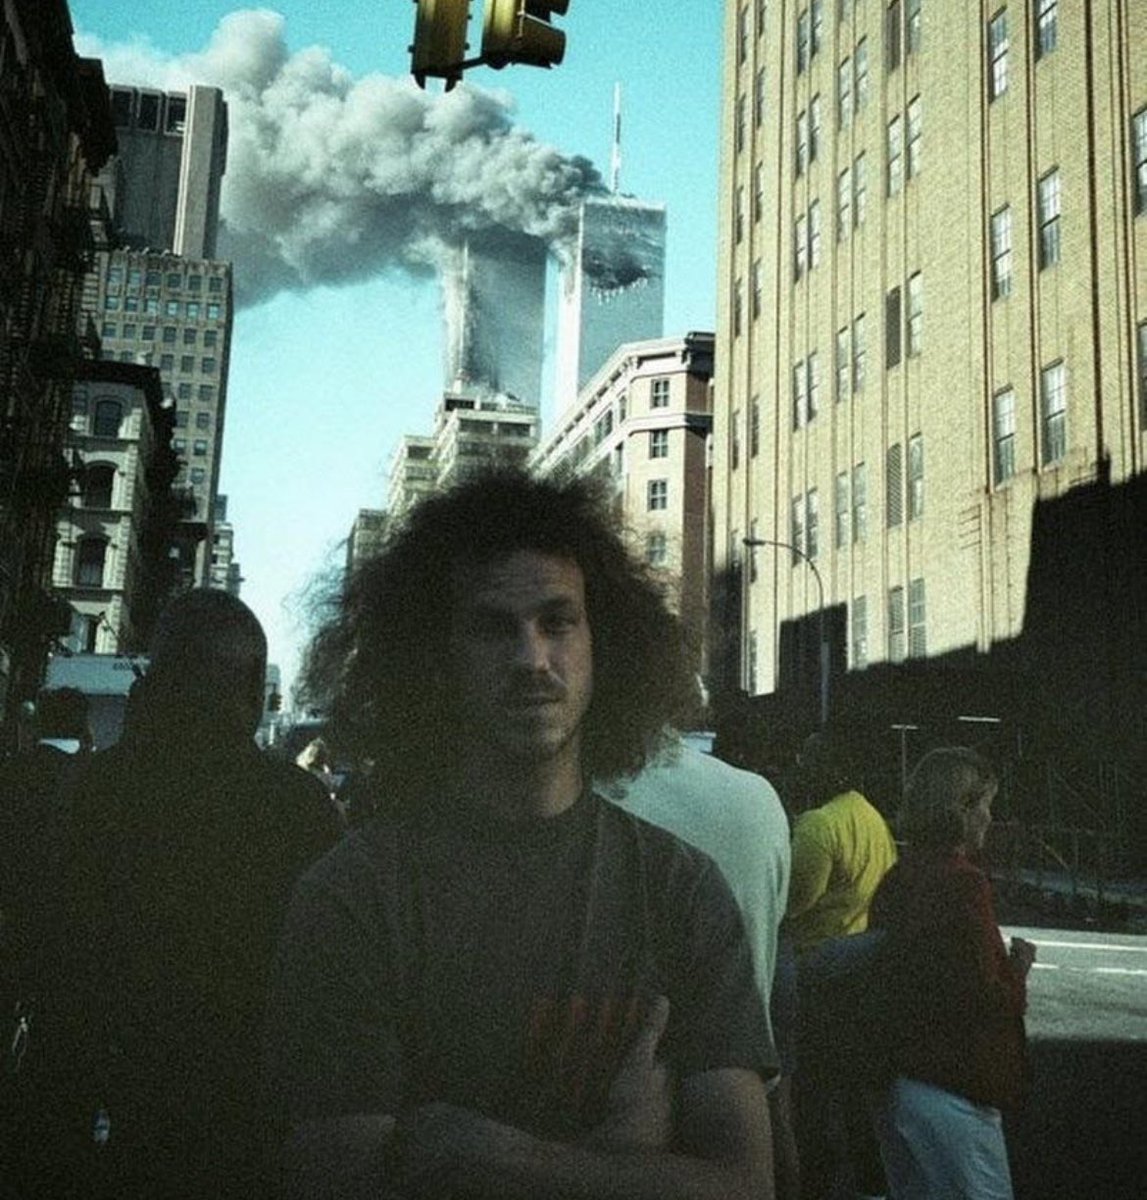 A collection of selfies taken on September 11th, 2001.